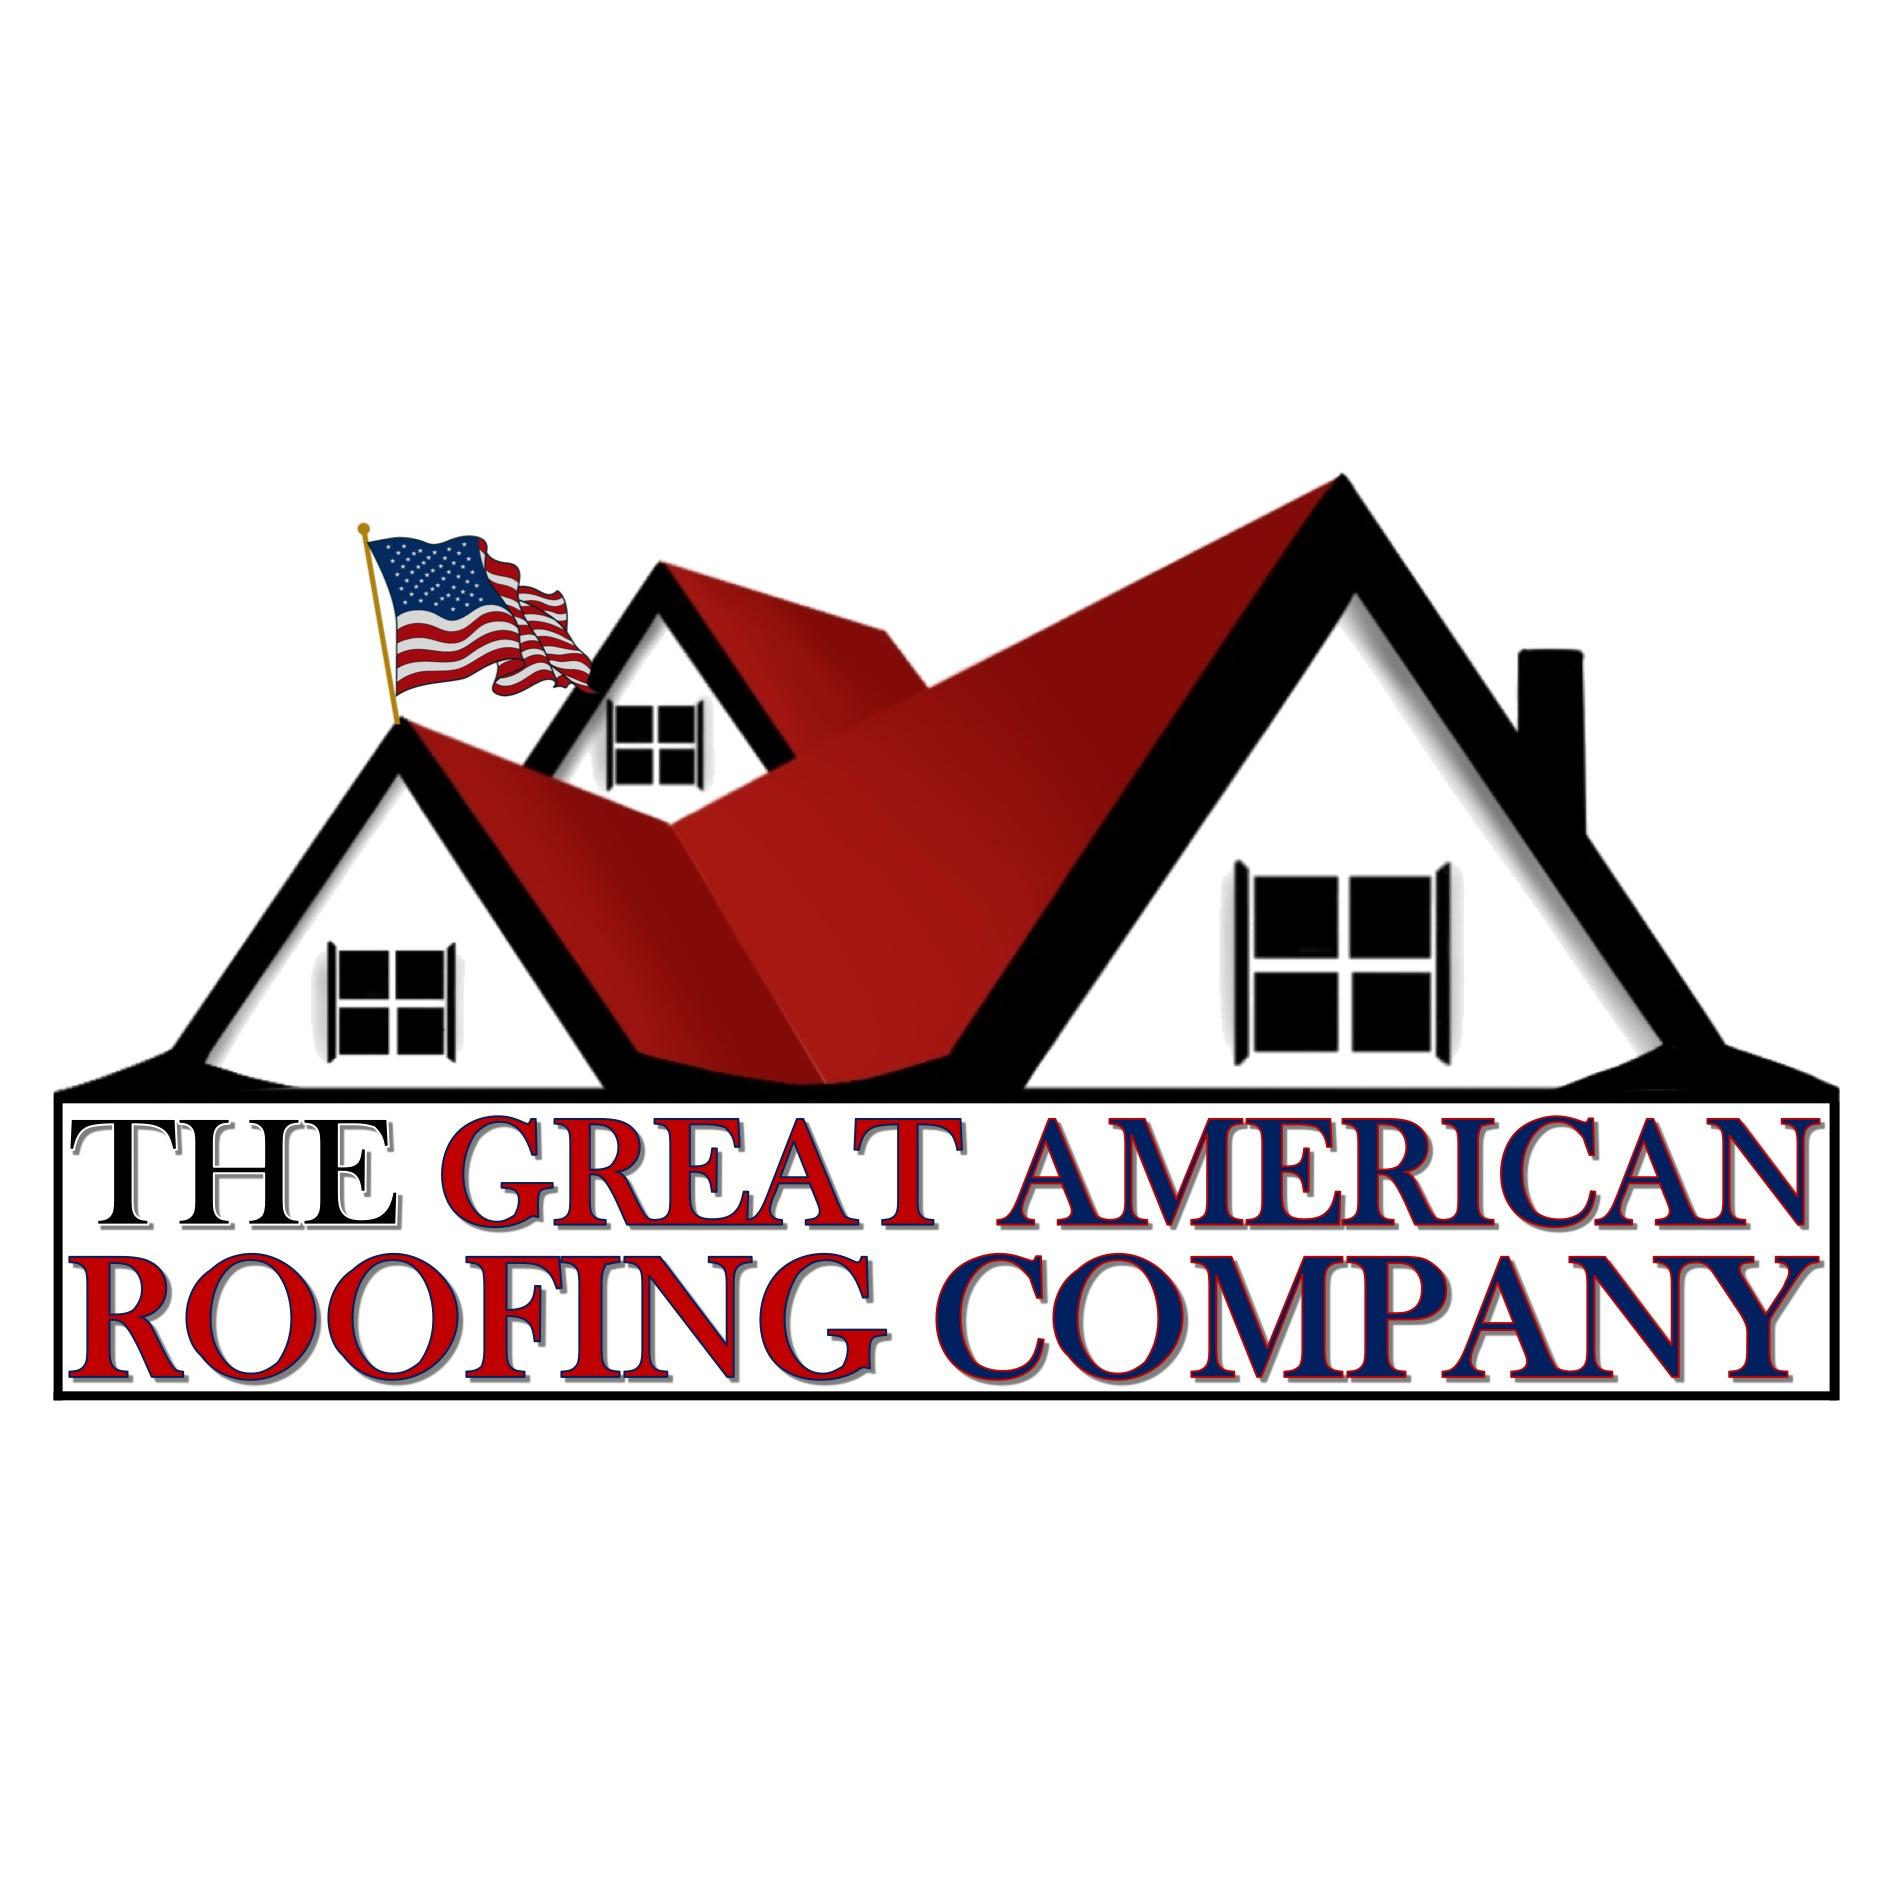 The Great American Roofing Company Upper Saddle River Nj Roofer Roof Estimate